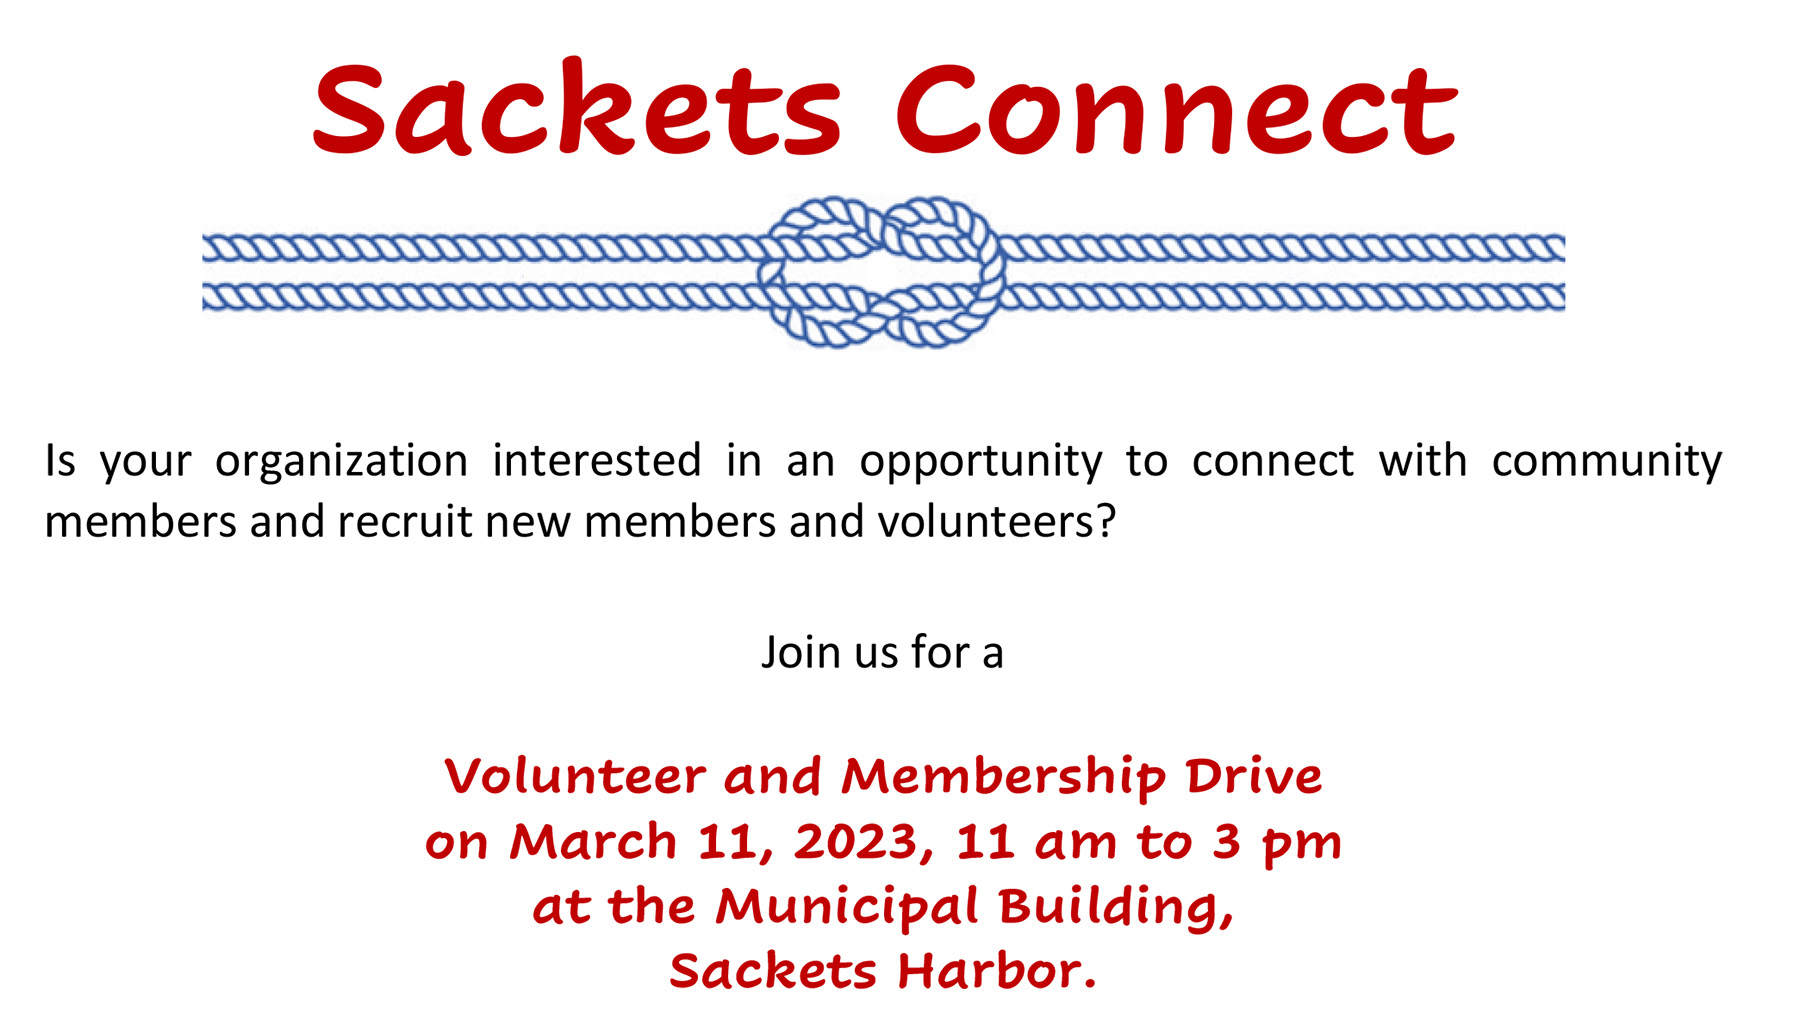 Top portion of the Sackets Connect 2023 event flyer